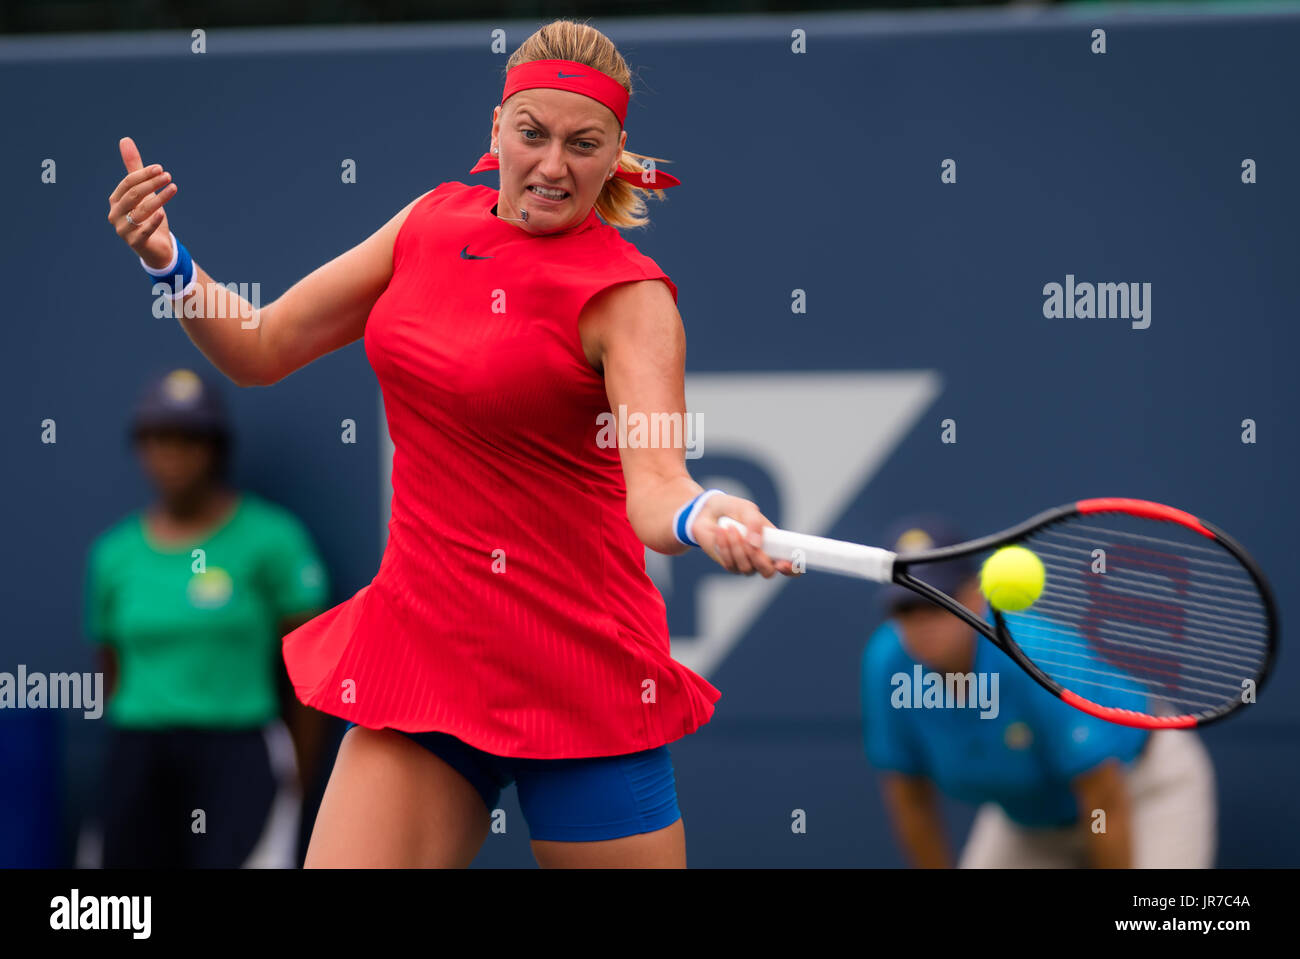 Stanford, United States. 3 August, 2017. Petra Kvitova of the Czech  Republic at the 2017 Bank of the West Classic WTA International tennis  tournament © Jimmie48 Photography/Alamy Live News Stock Photo - Alamy